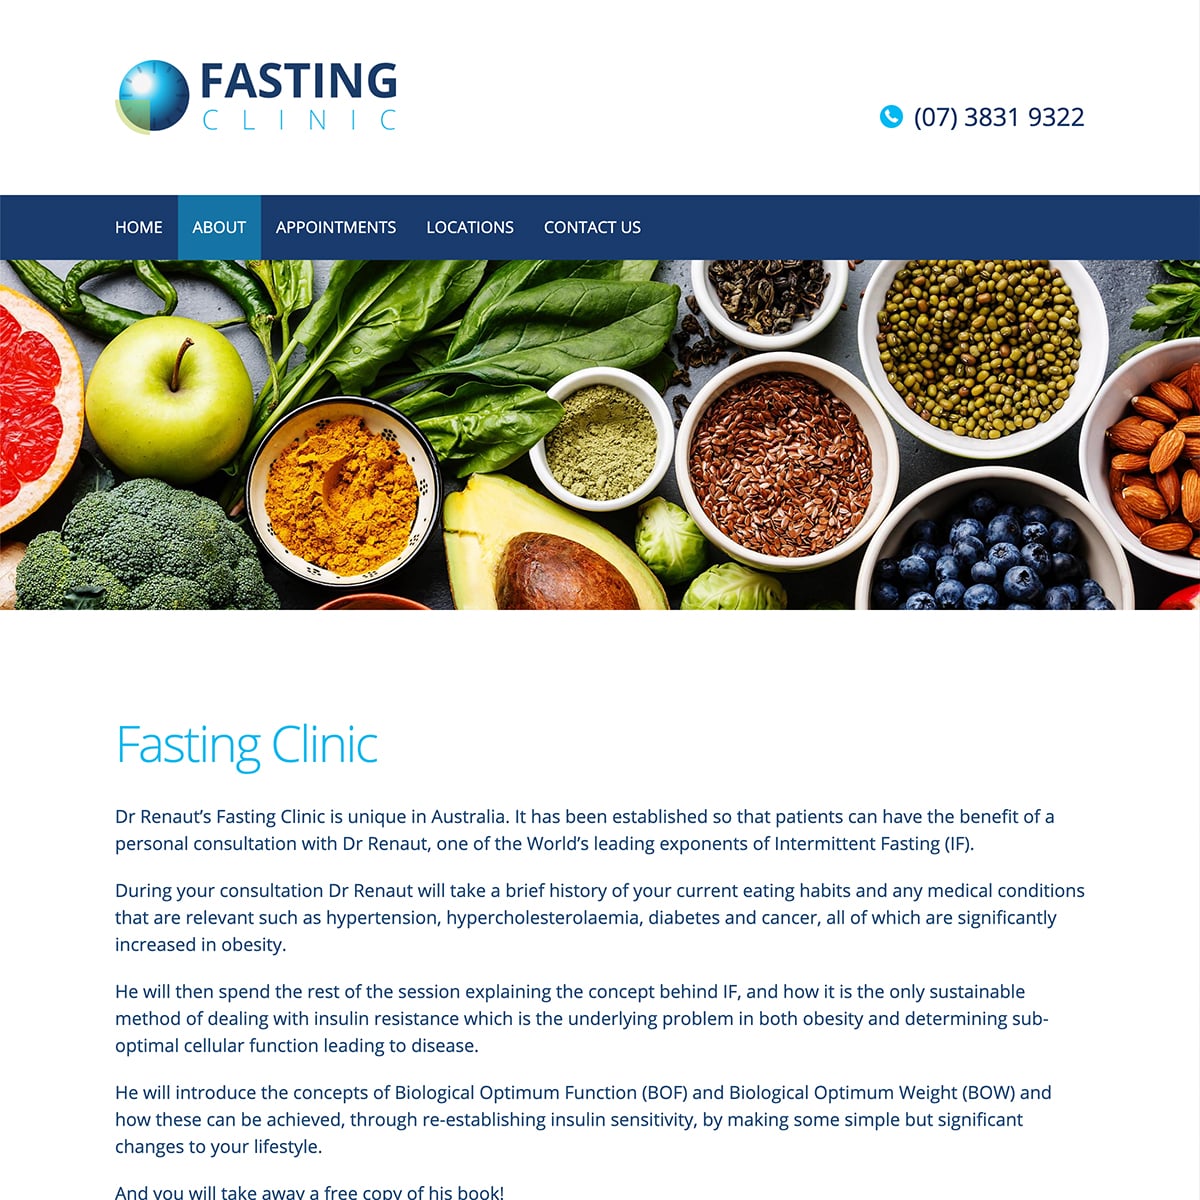 Fasting Clinic - About